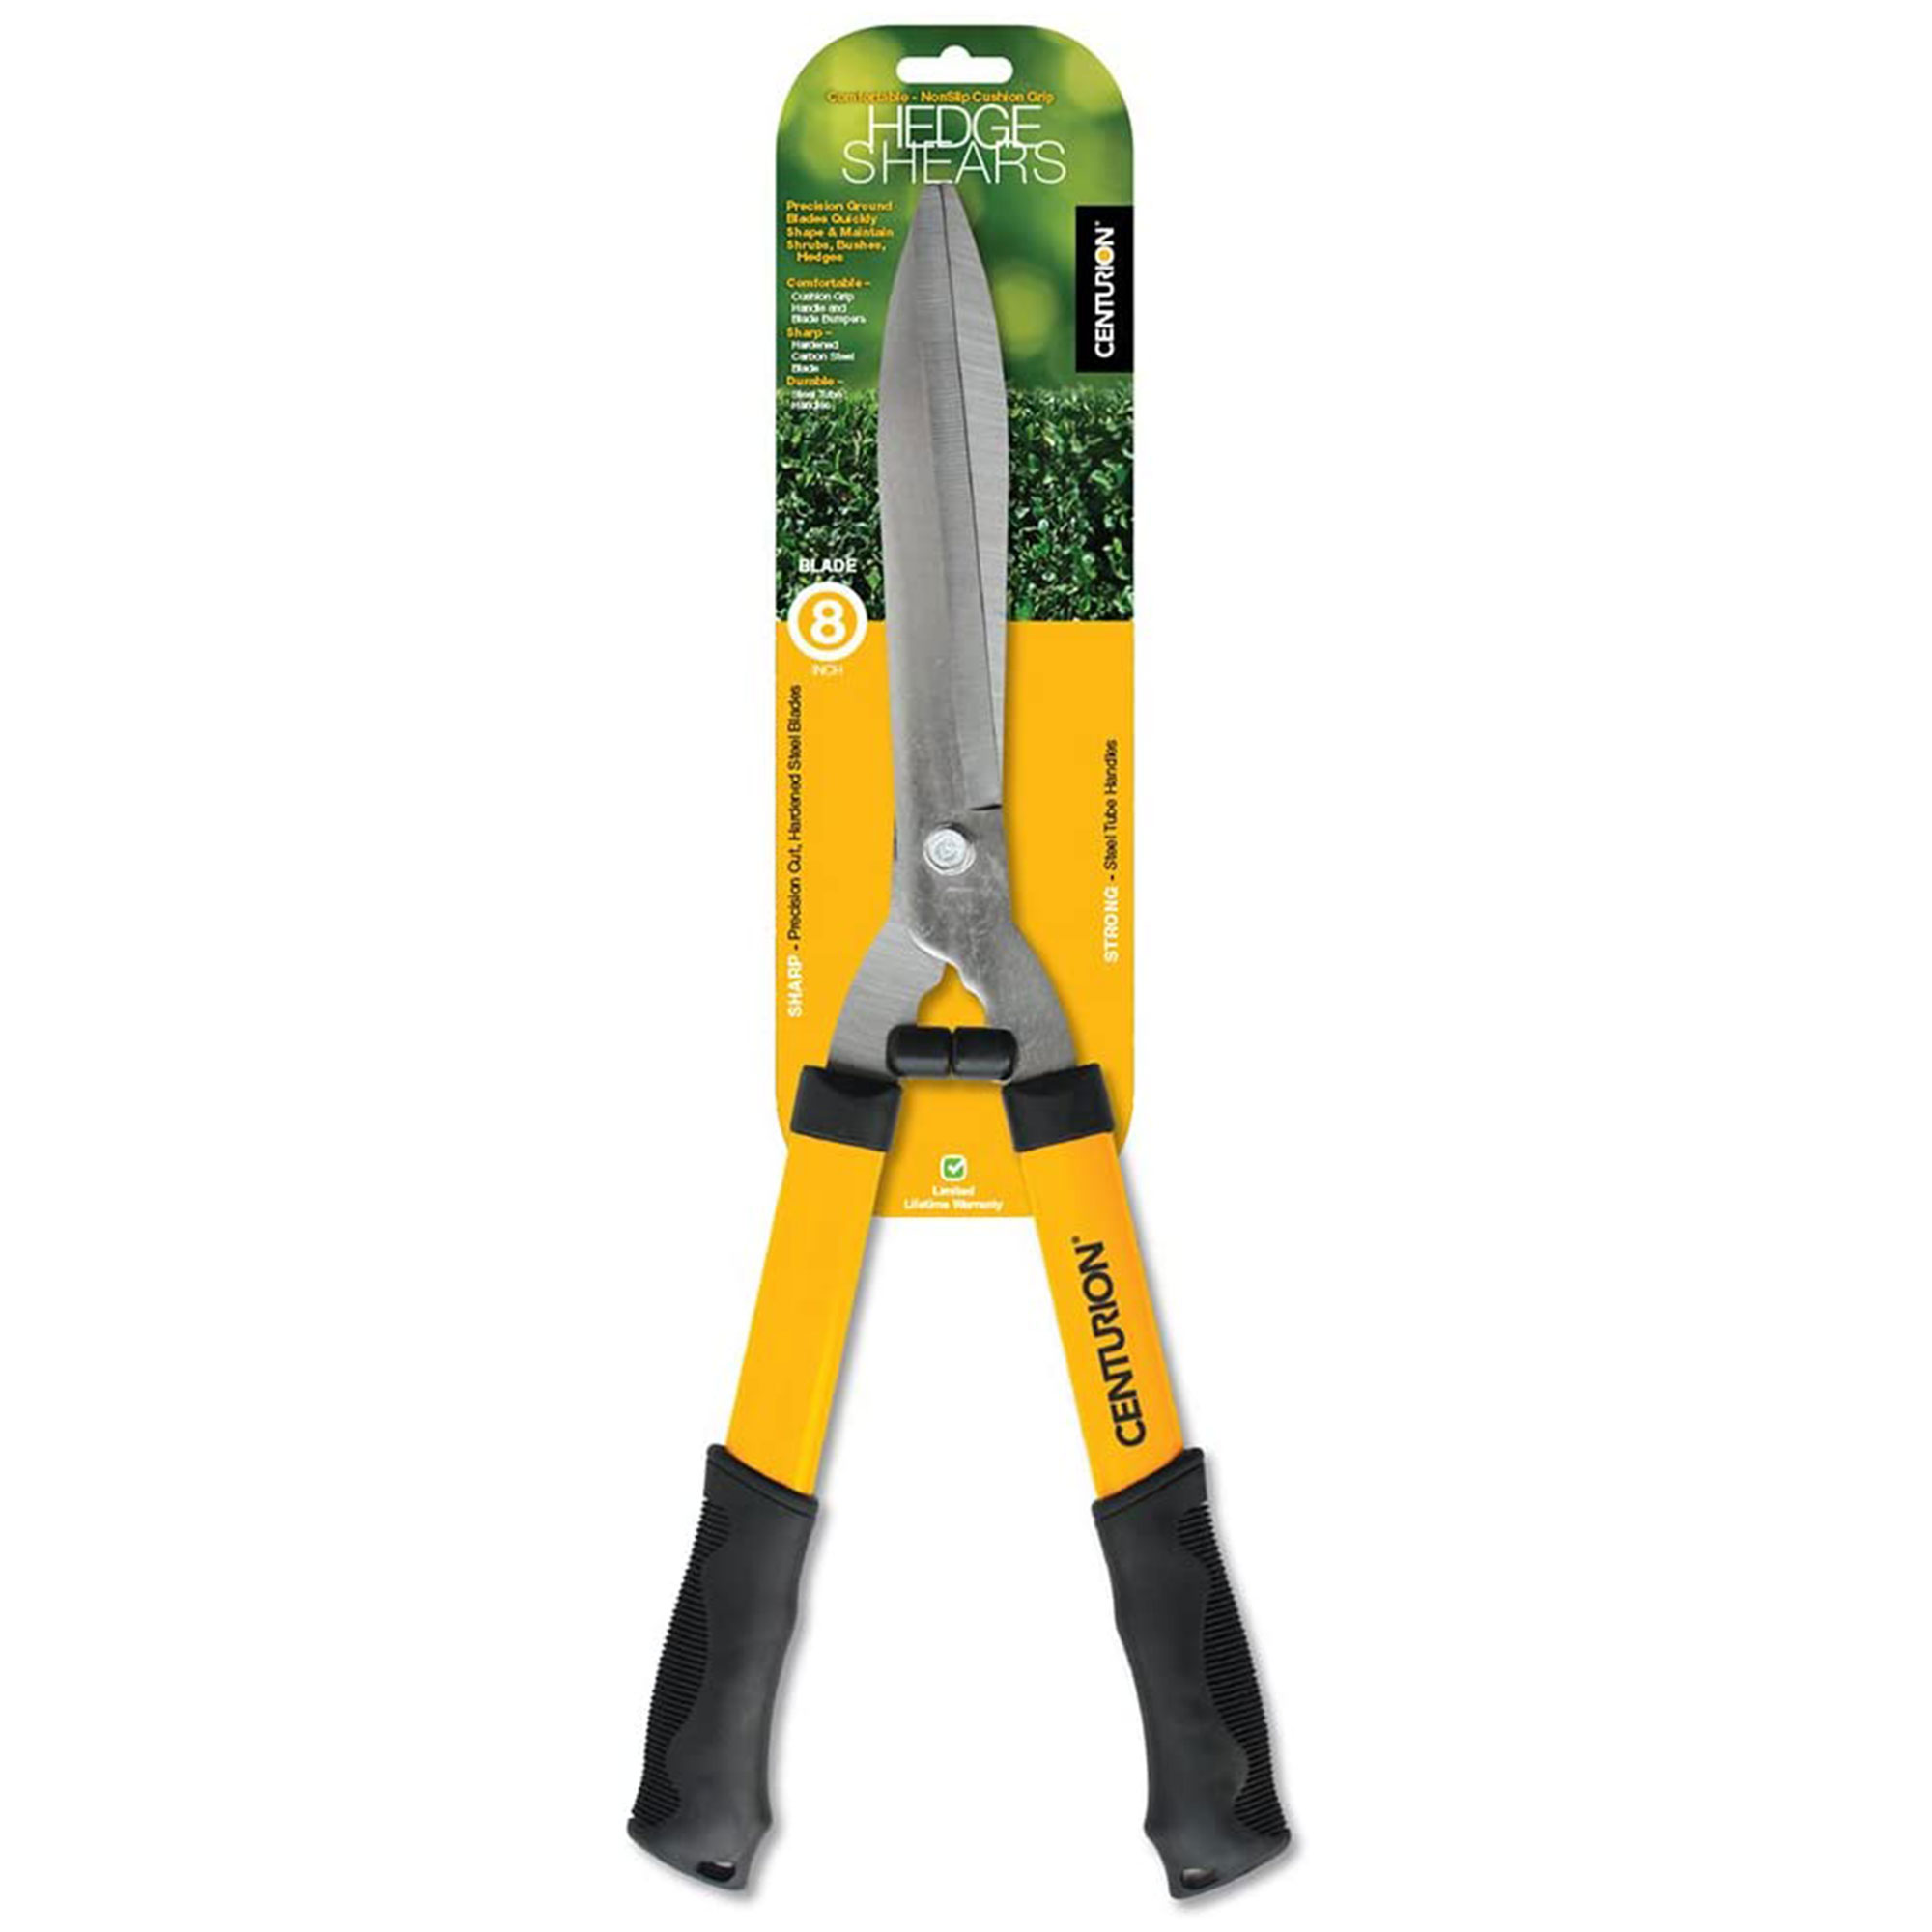 CENTURION 511 8 Inch Precision Steel Blades Hedge Shears w/ Non-Slip Grips - image 5 of 8